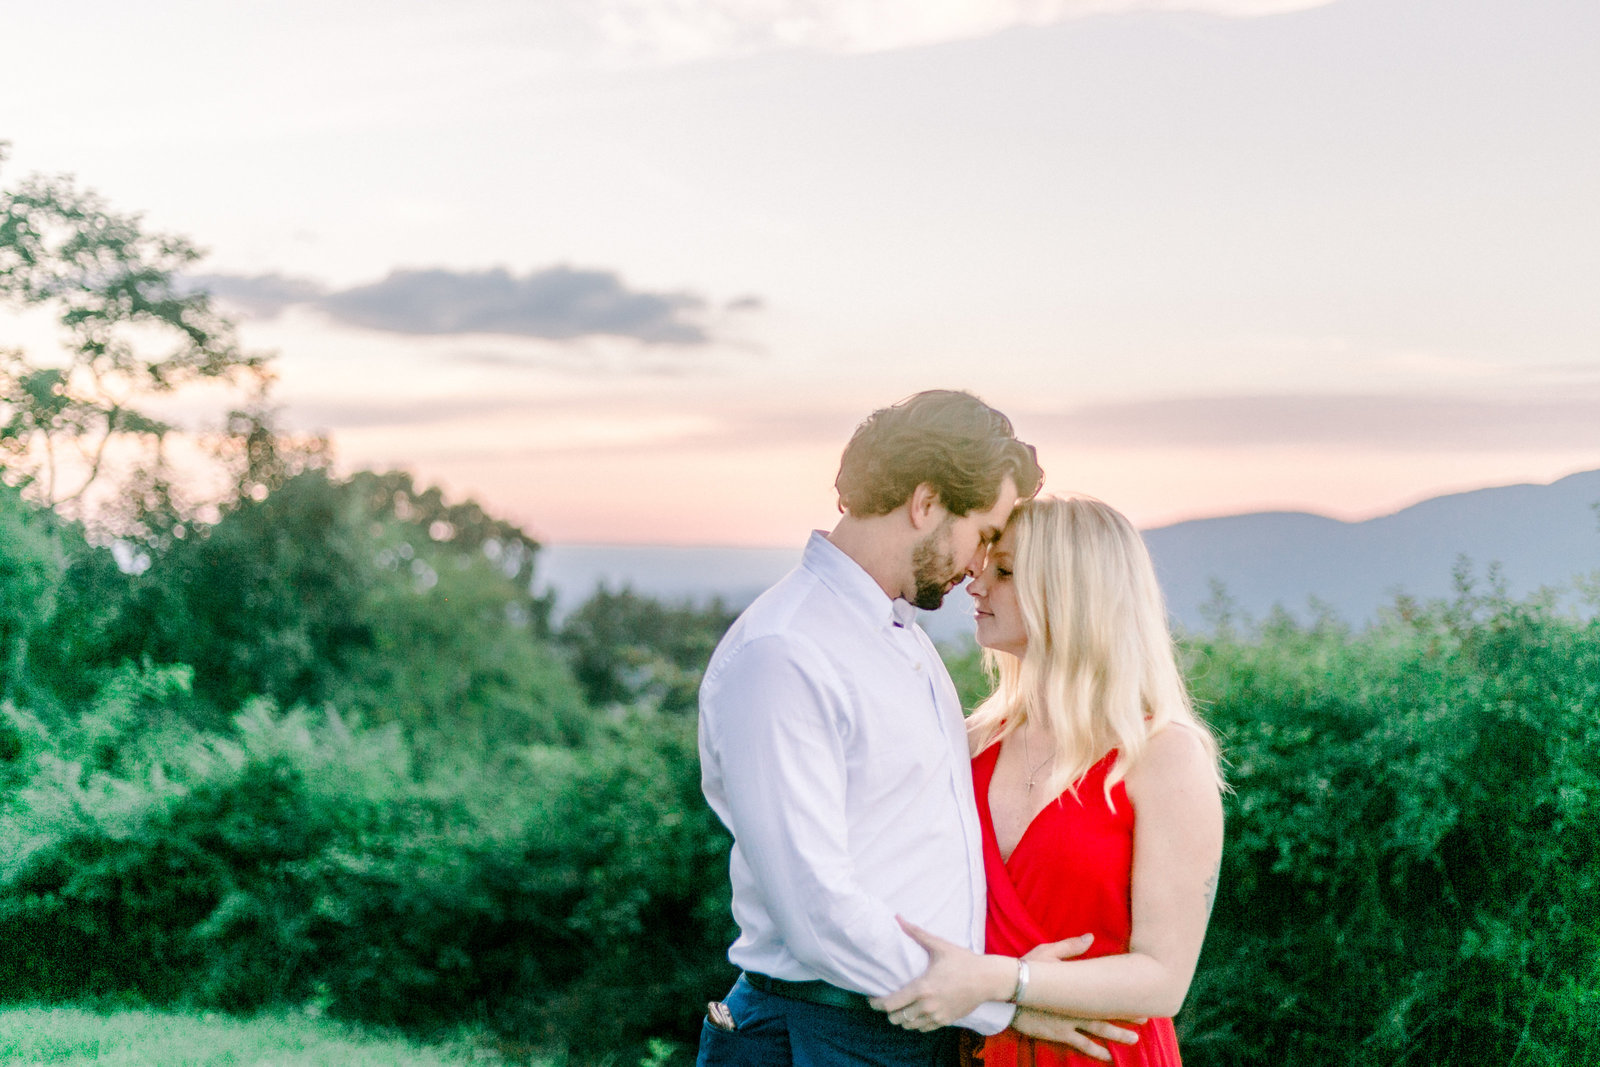 Romantic view for engagement photos captured by Staci Addison Photography